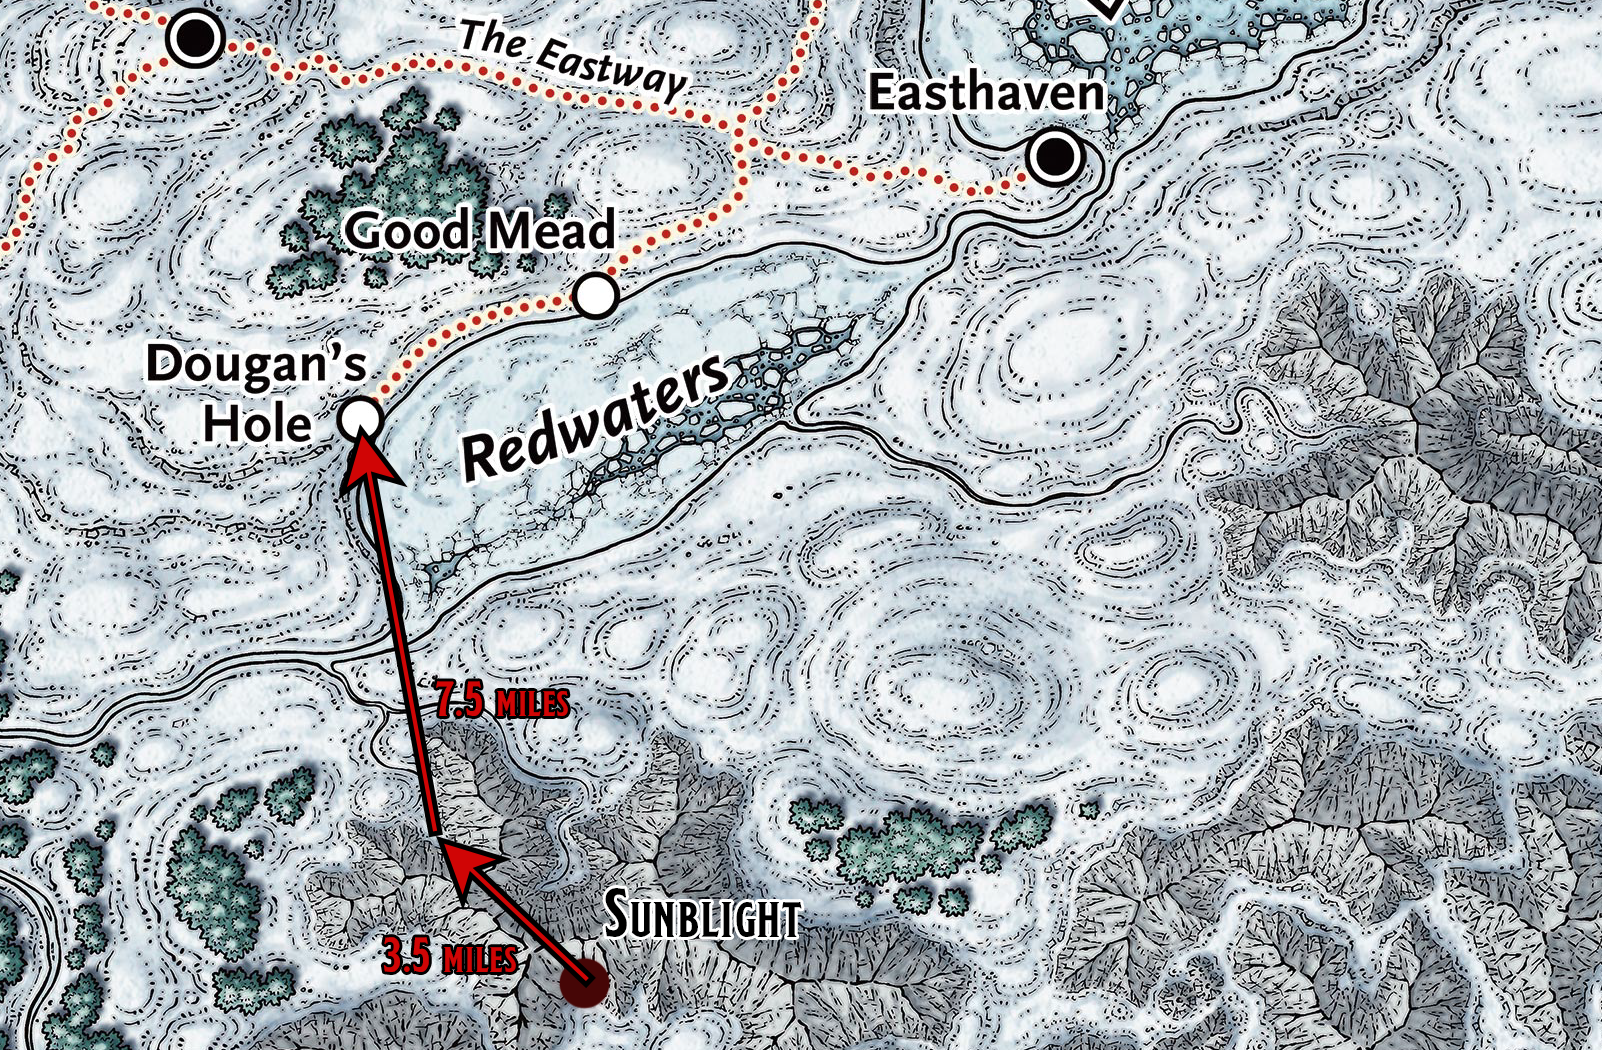 Icewind Dale - Sunblight to Dougan's Hole Map (Land Route)